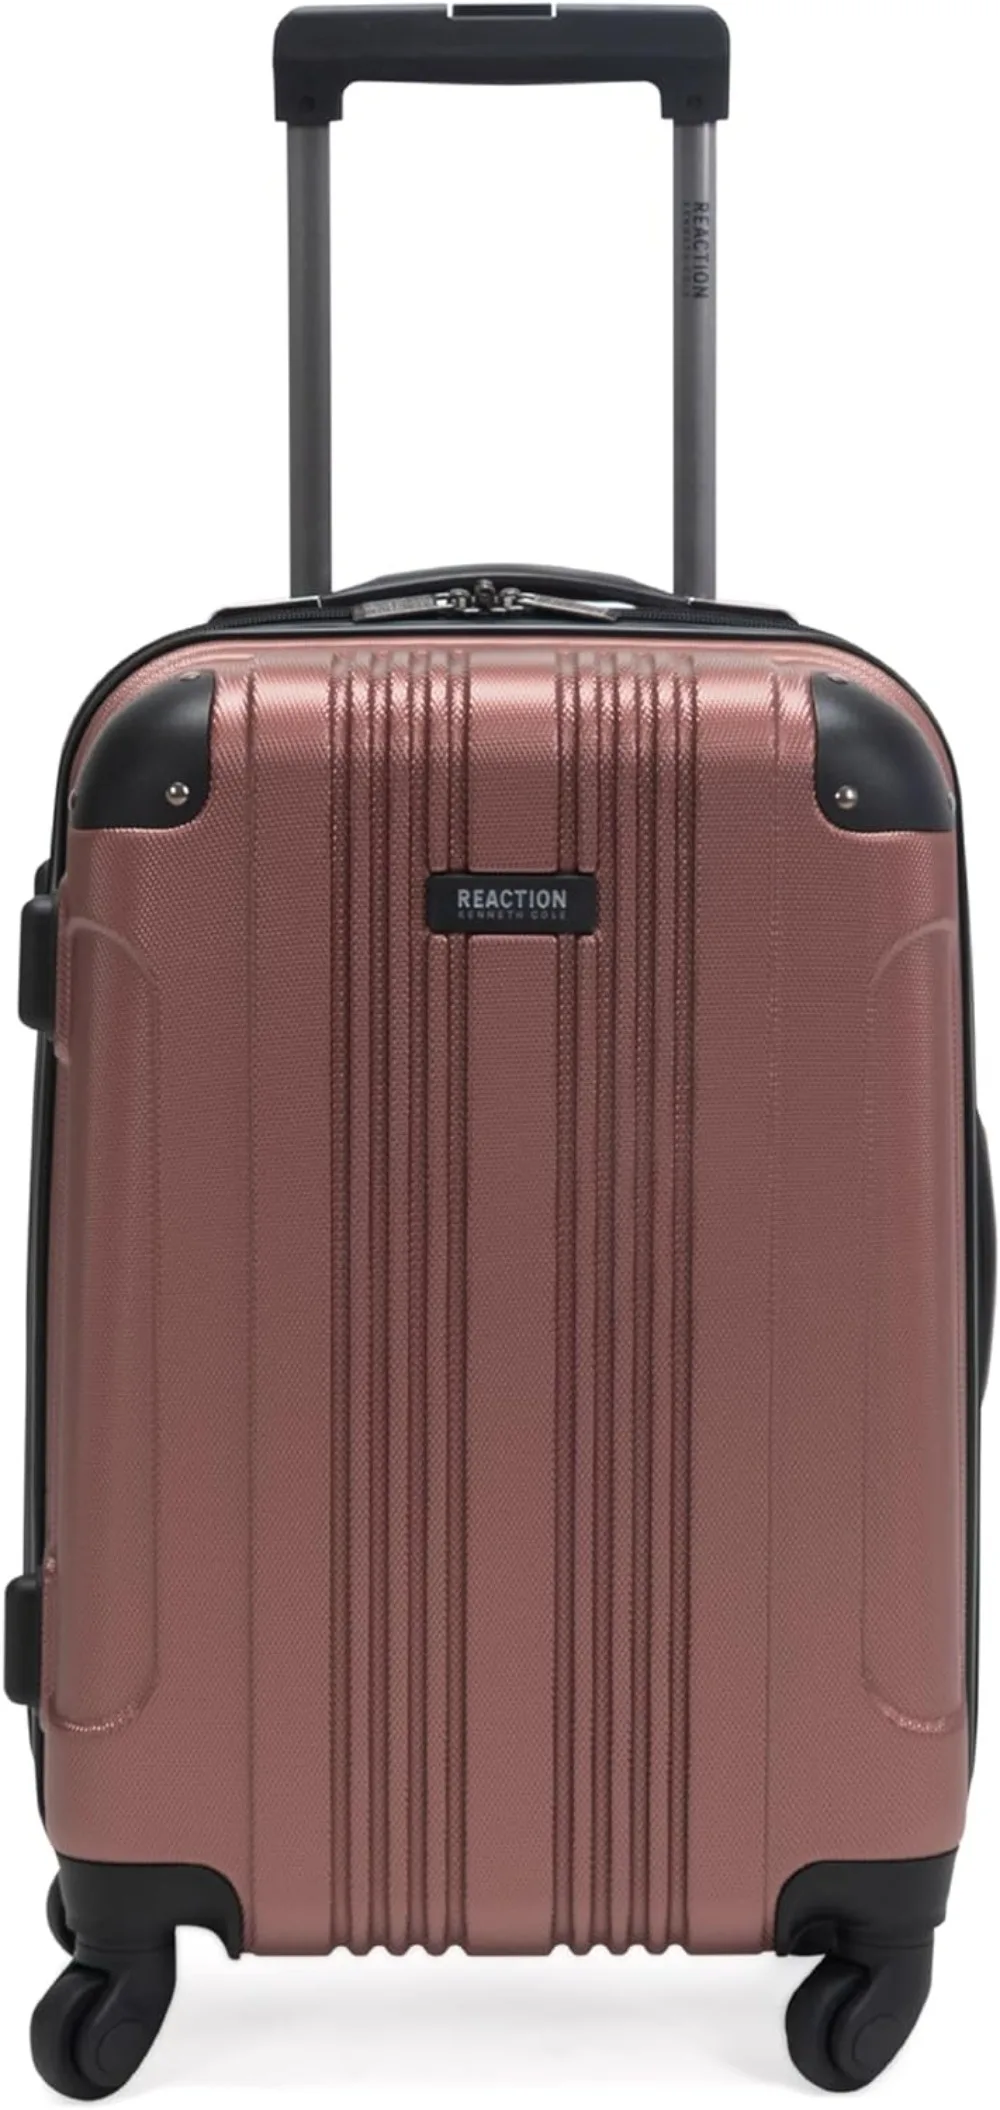 

Kenneth Cole REACTION Out of Bounds Lightweight Hardshell 4-Wheel Spinner Luggage, Rose Gold, 20-Inch